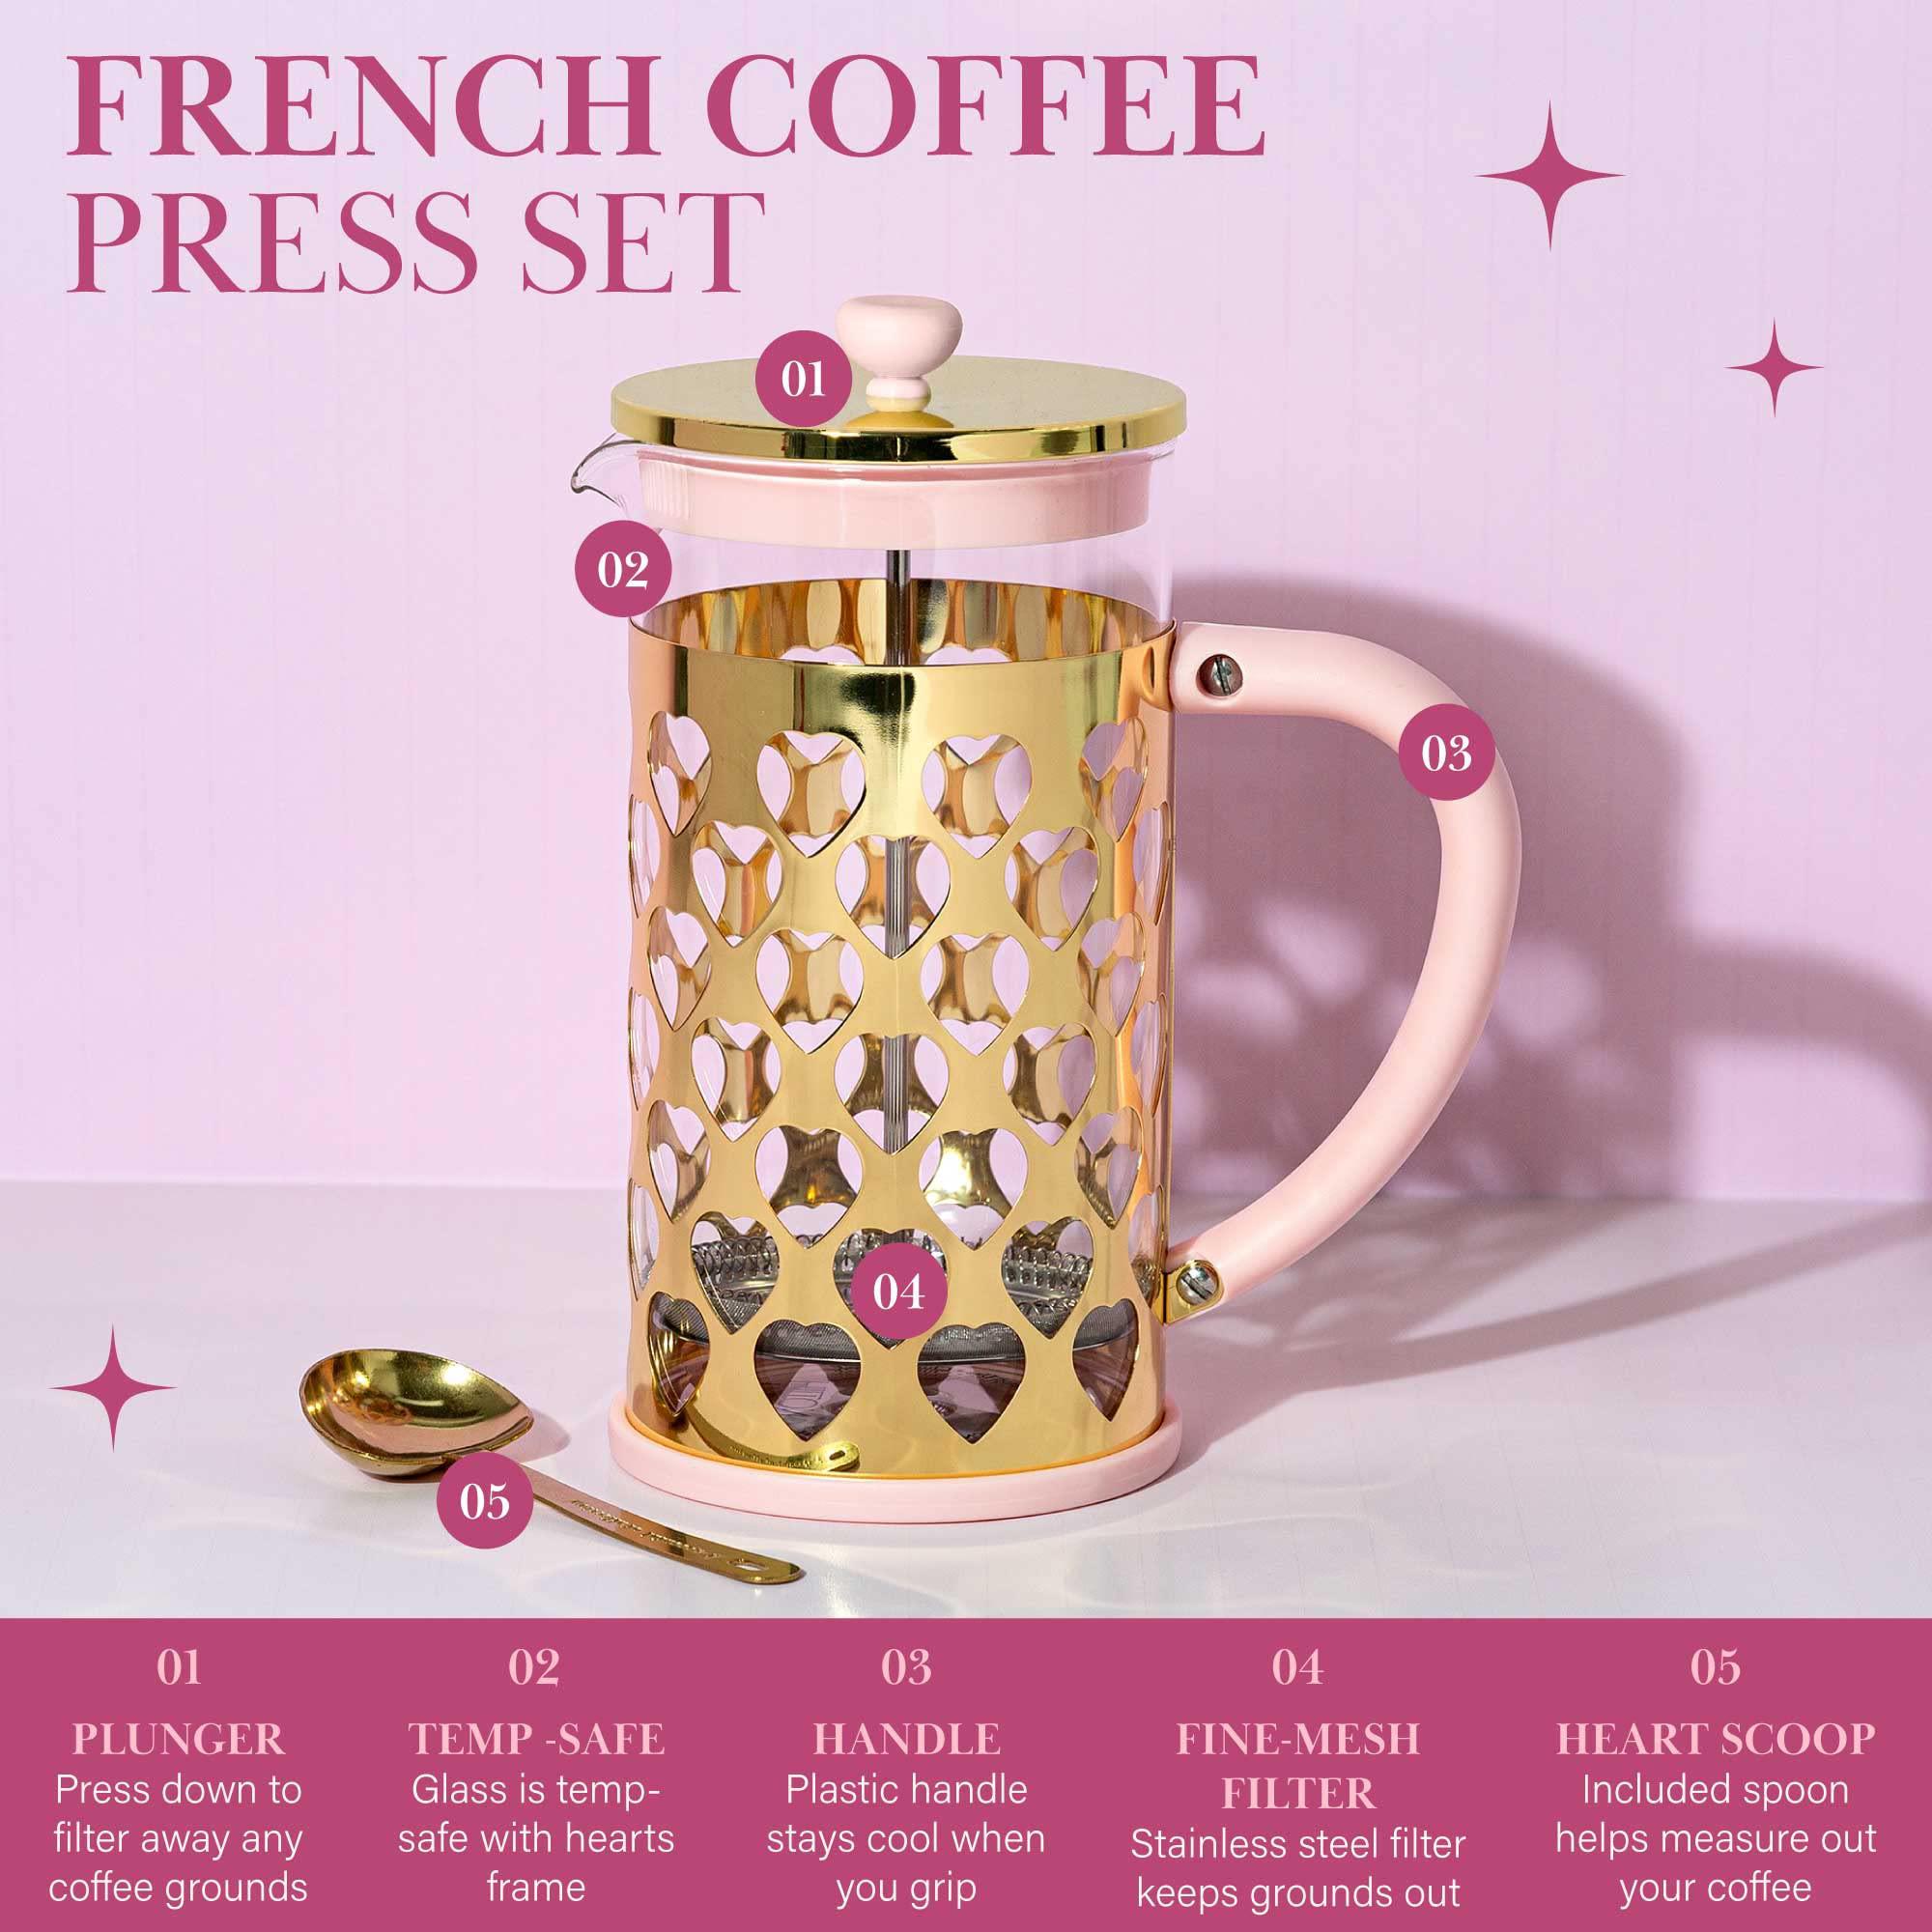 paris hilton french press coffee maker with heart shaped measuring scoop, 2-piece set, 8-cup or 34-ounce, pink